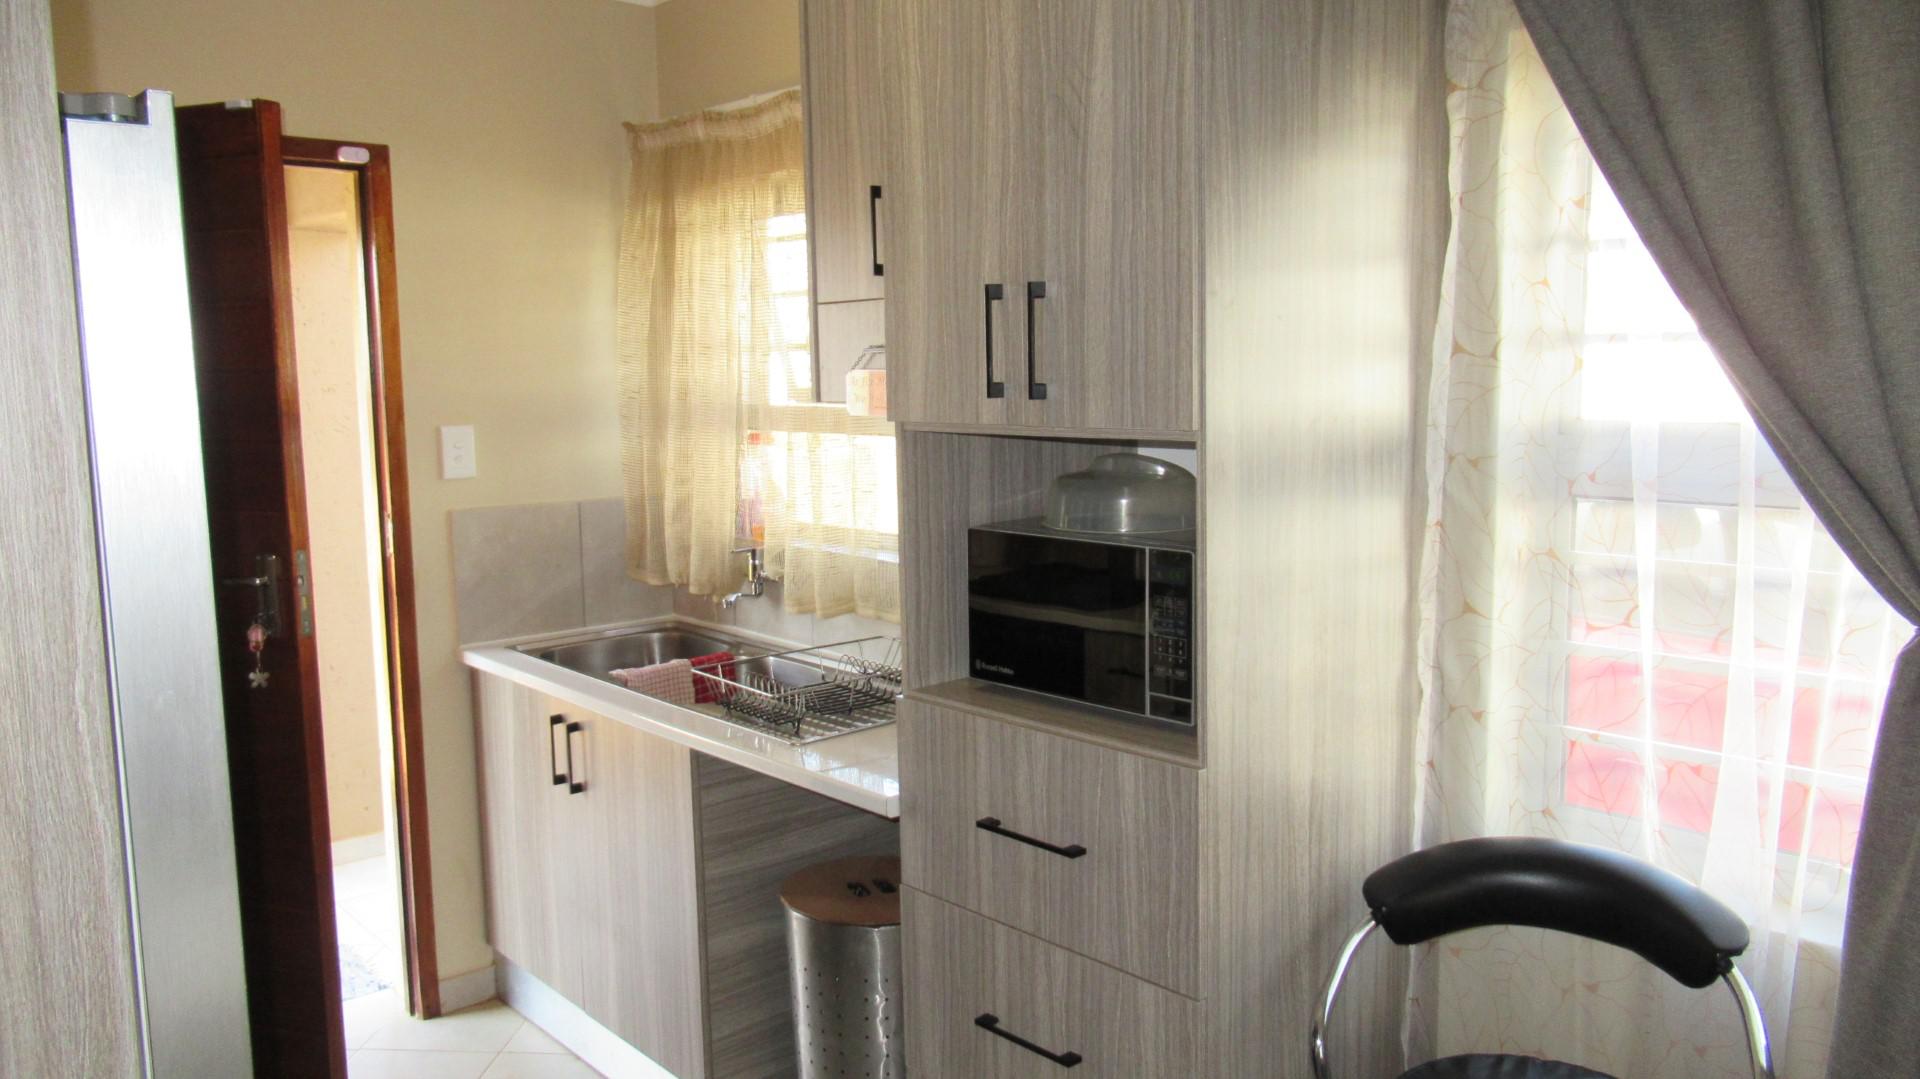 Kitchen - 9 square meters of property in Salfin